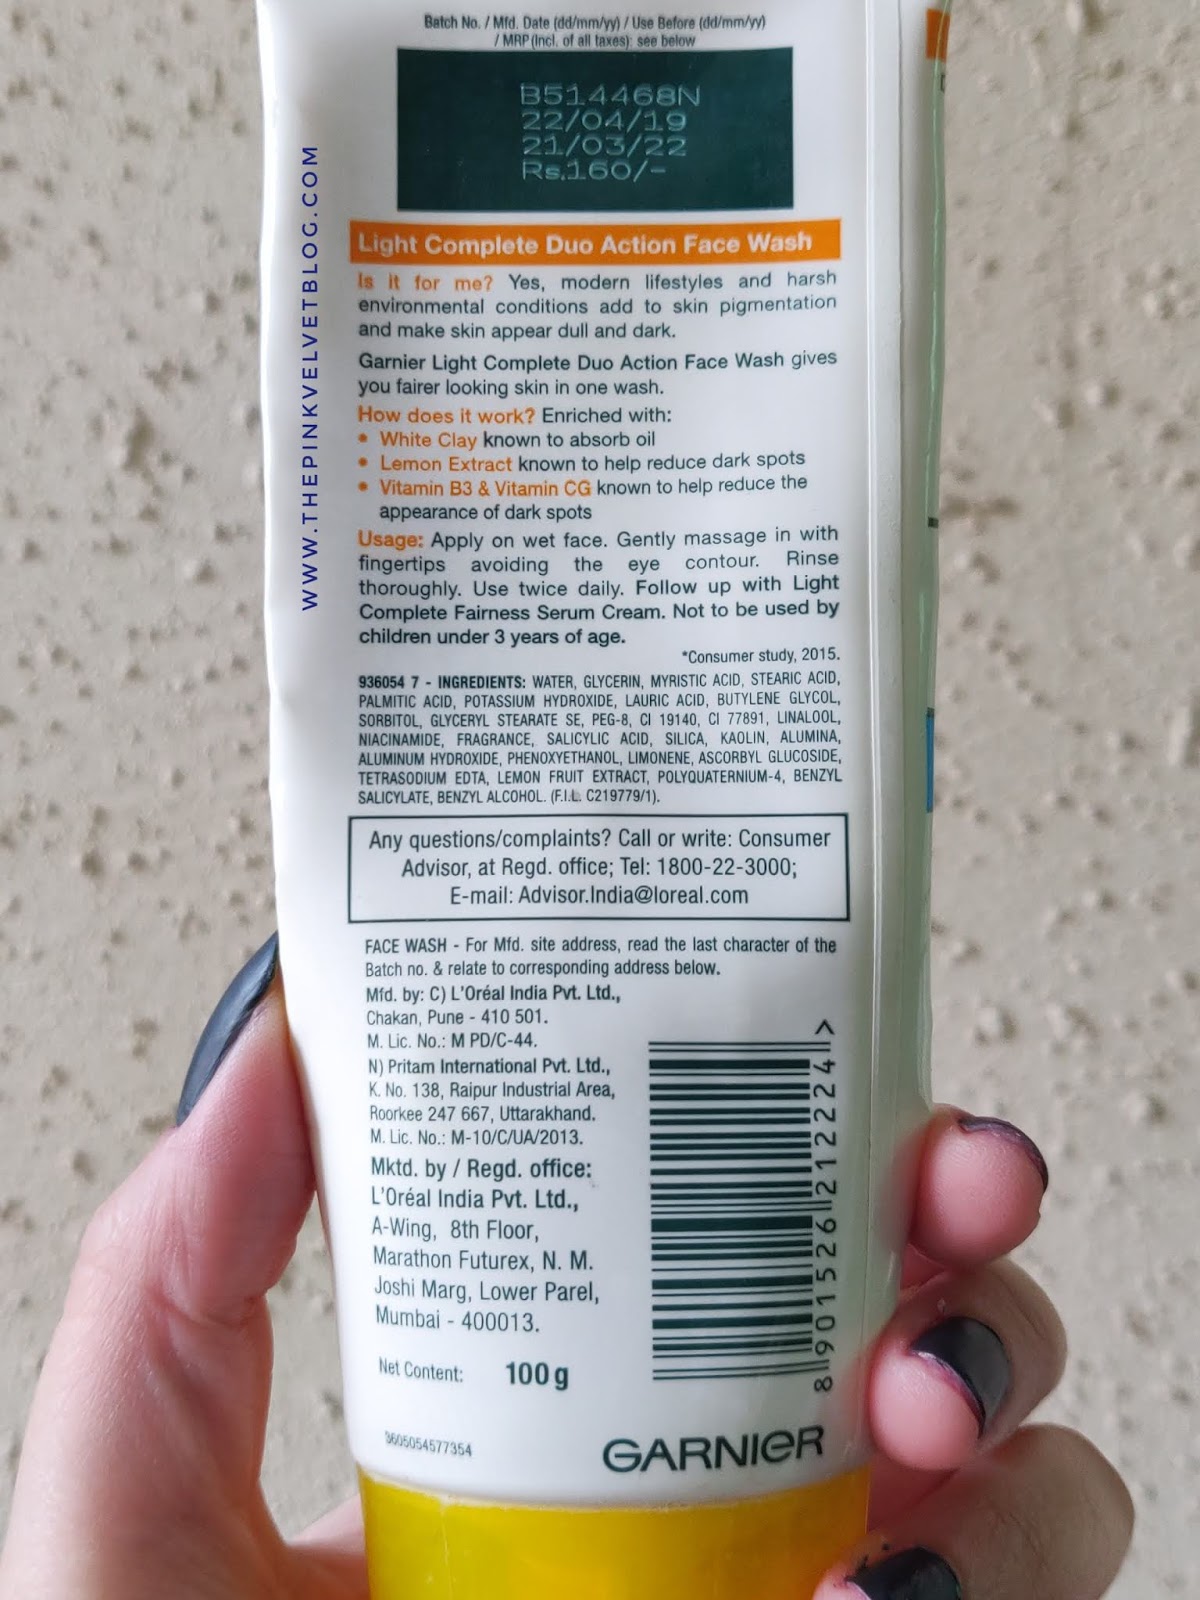 Garnier Light Complete Duo Action Face Wash - Review Ingredients 